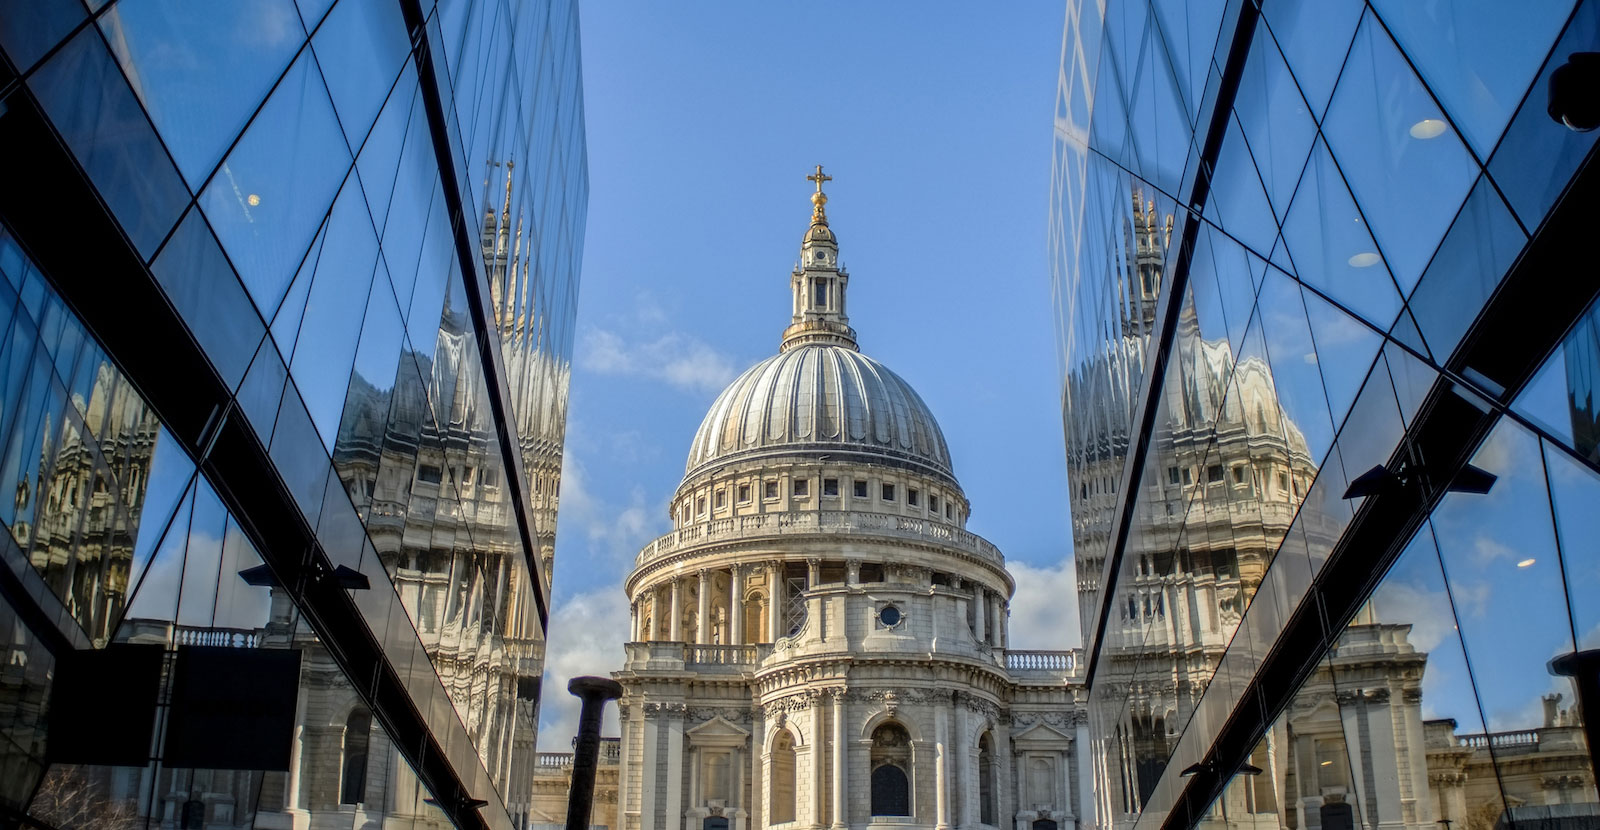 St. Paul's  Cathedral reflected in modern buildings nearby